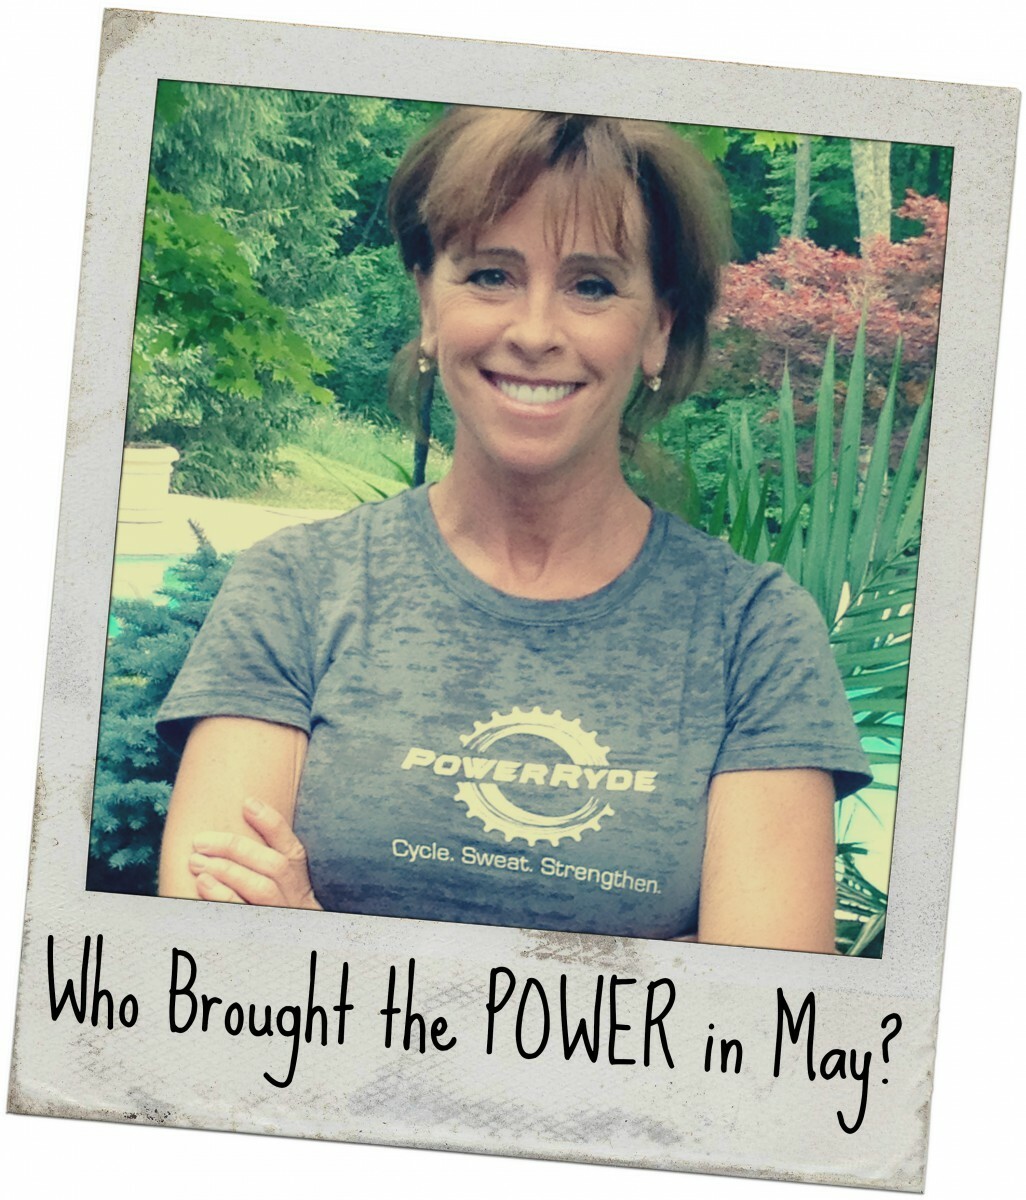 Polaroid style picture of Leigh Anne Meurer with 'Who Brought the POWER in May'?